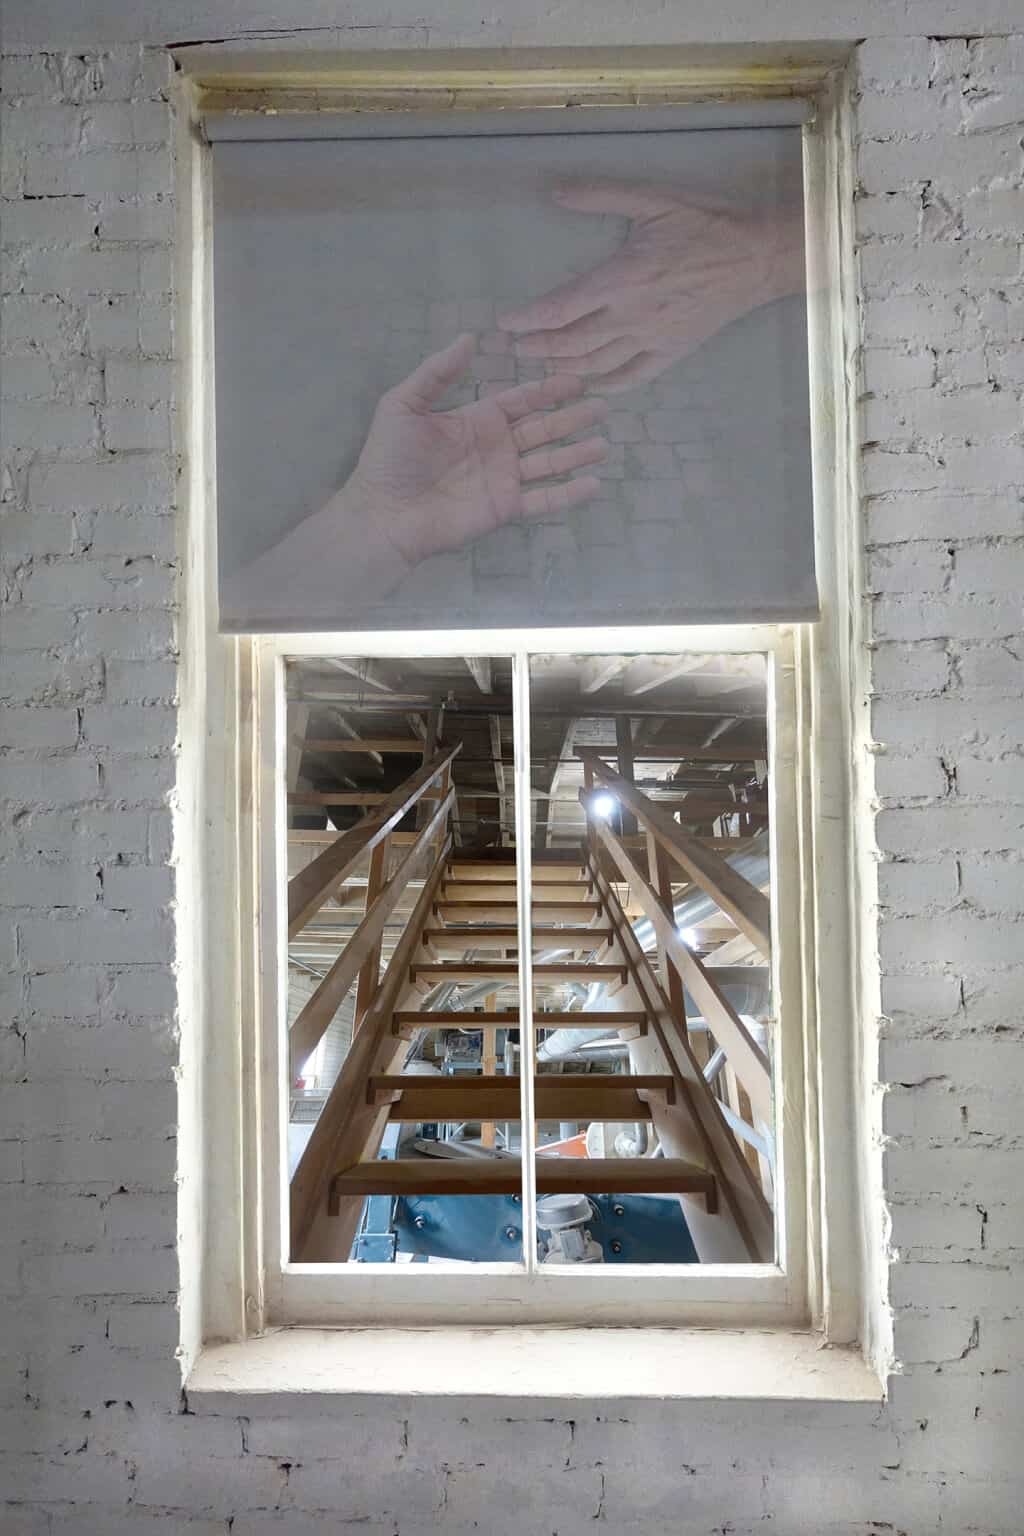 Robin Botie of Ithaca, New York, photoshops hands reaching out over a scene of brick wall and staircase.